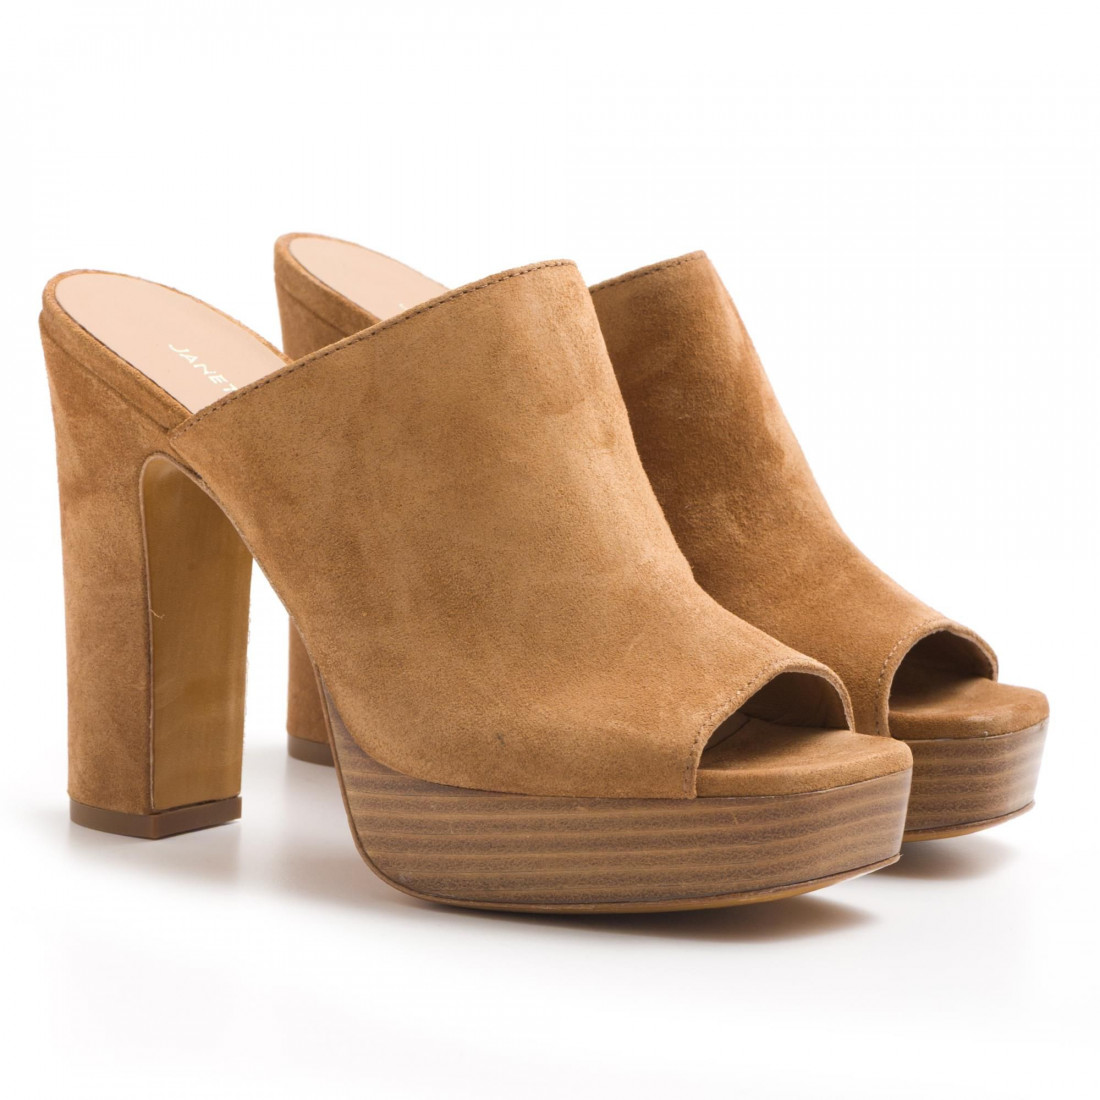 High heel sandals in suede with plateau